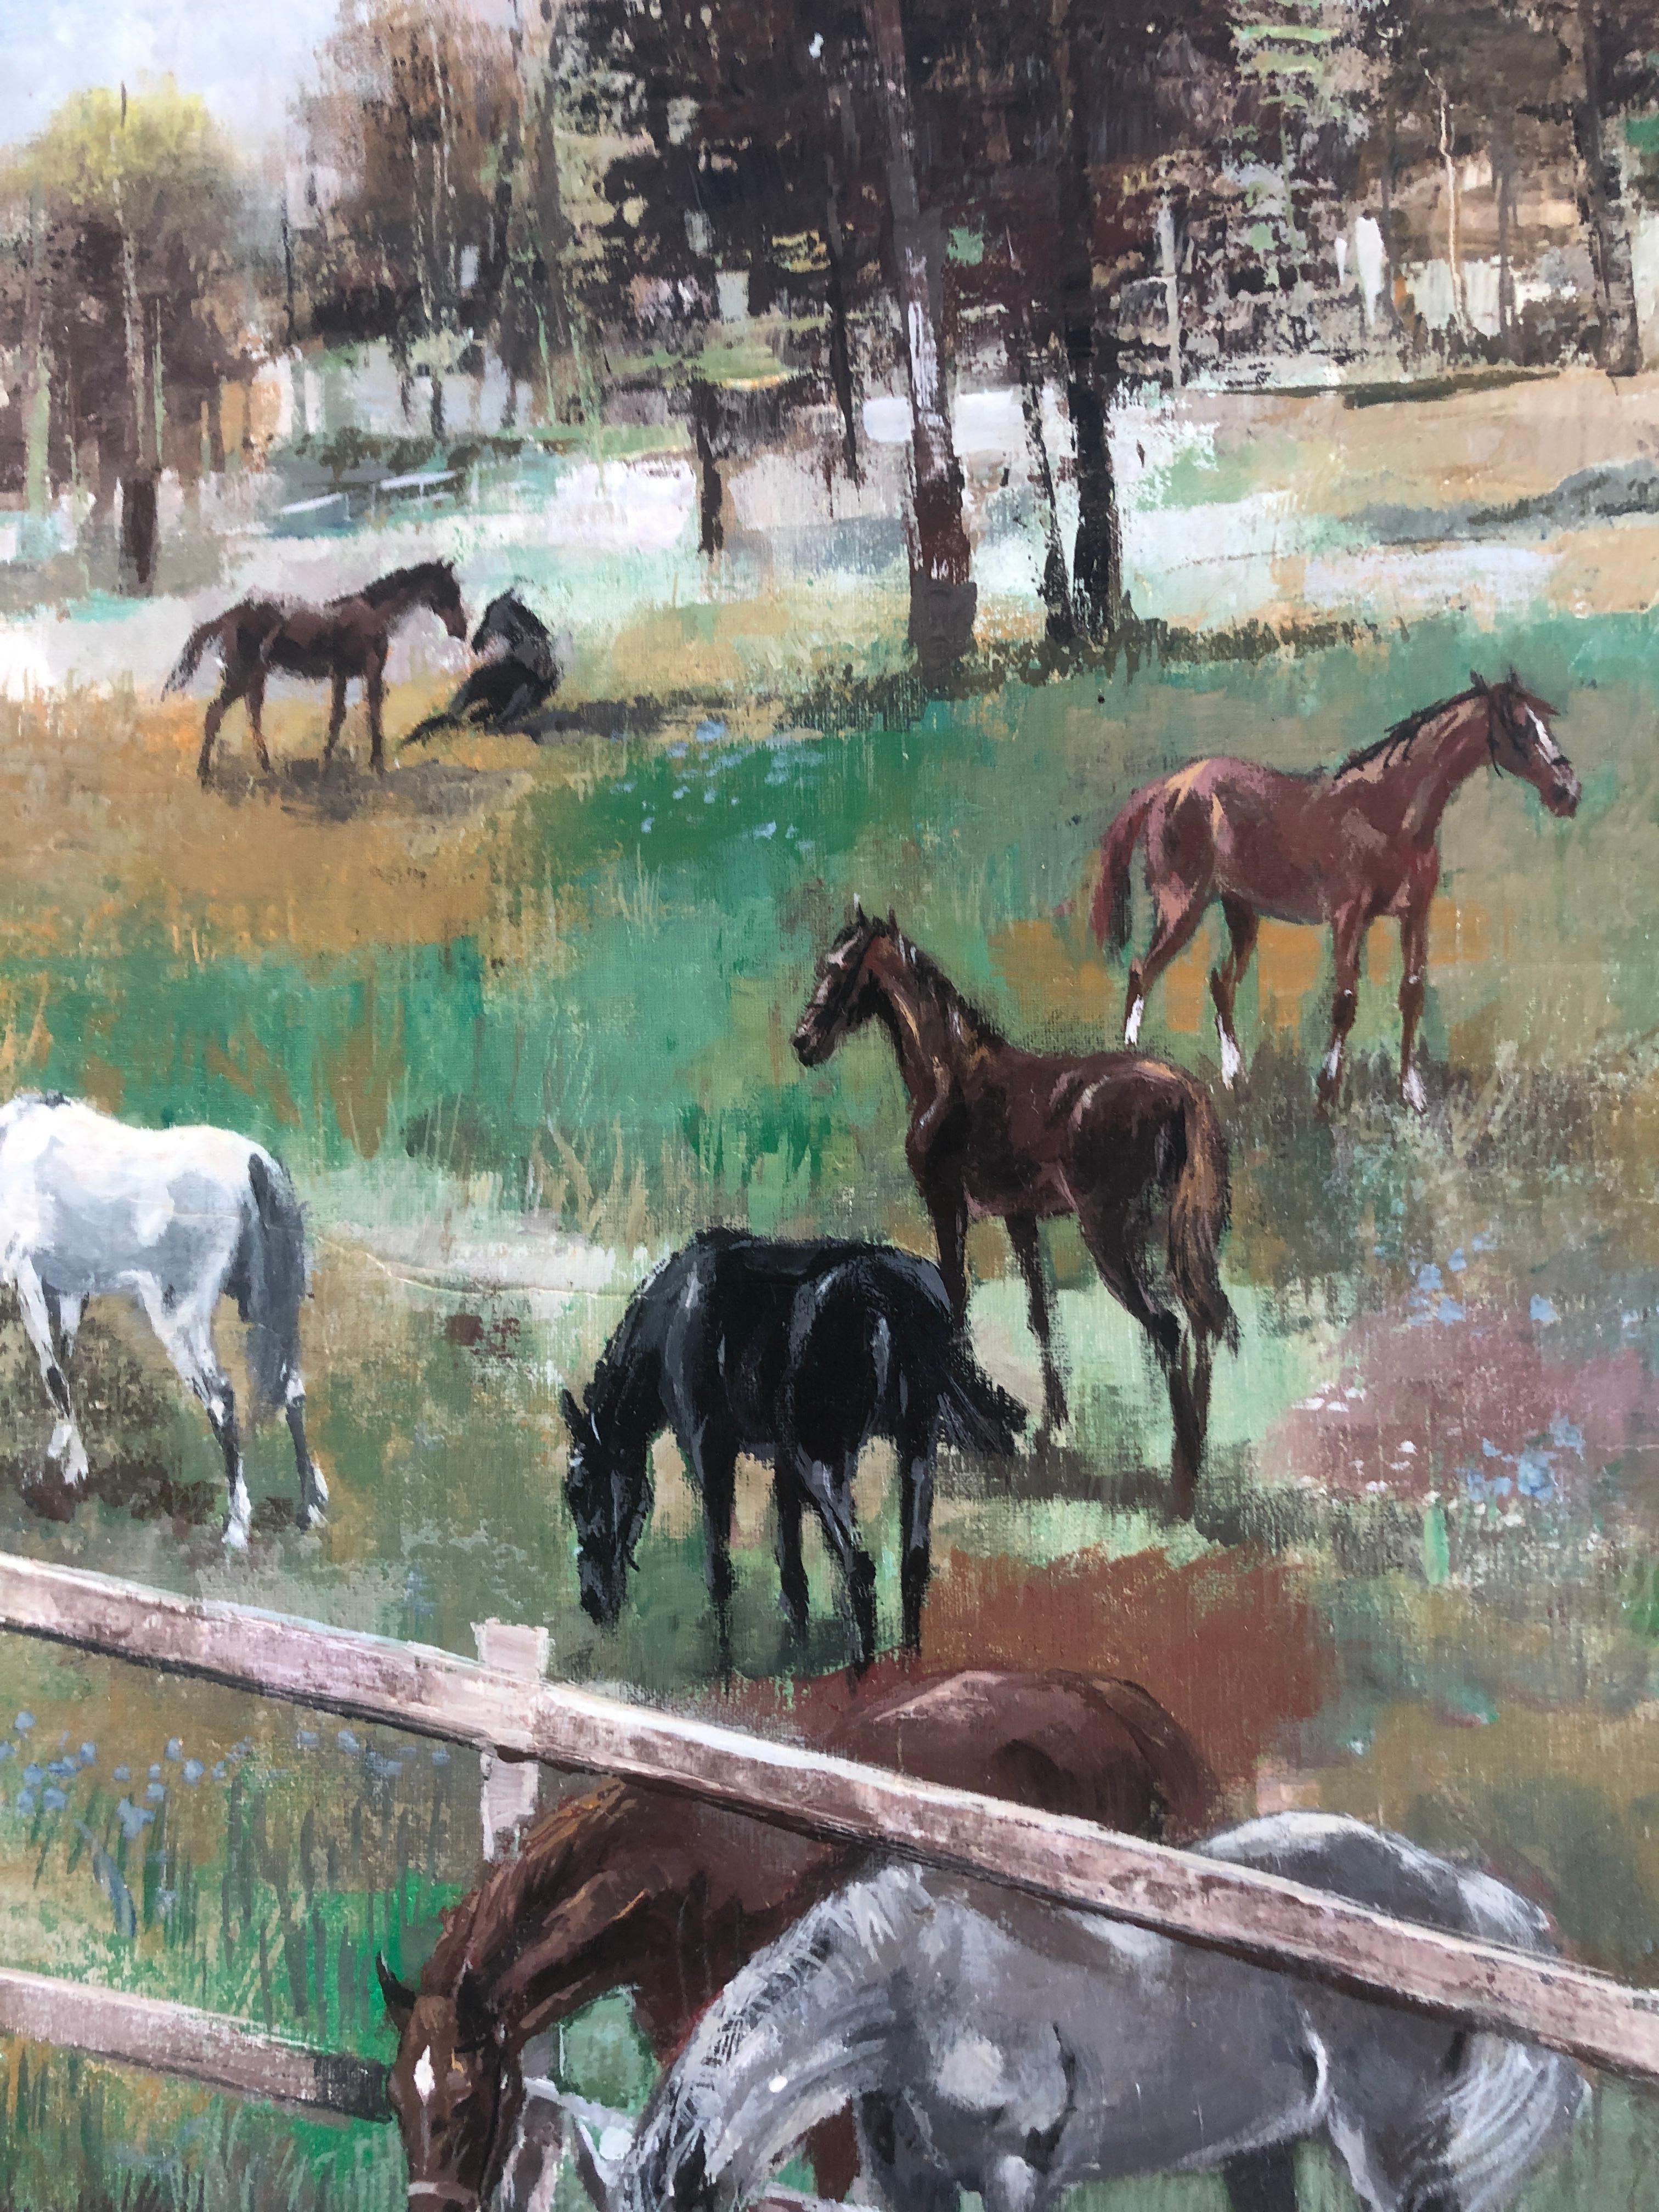 horses in the field landscape oil on canvas painting - Gray Landscape Painting by Jose Luis Florit Rodero